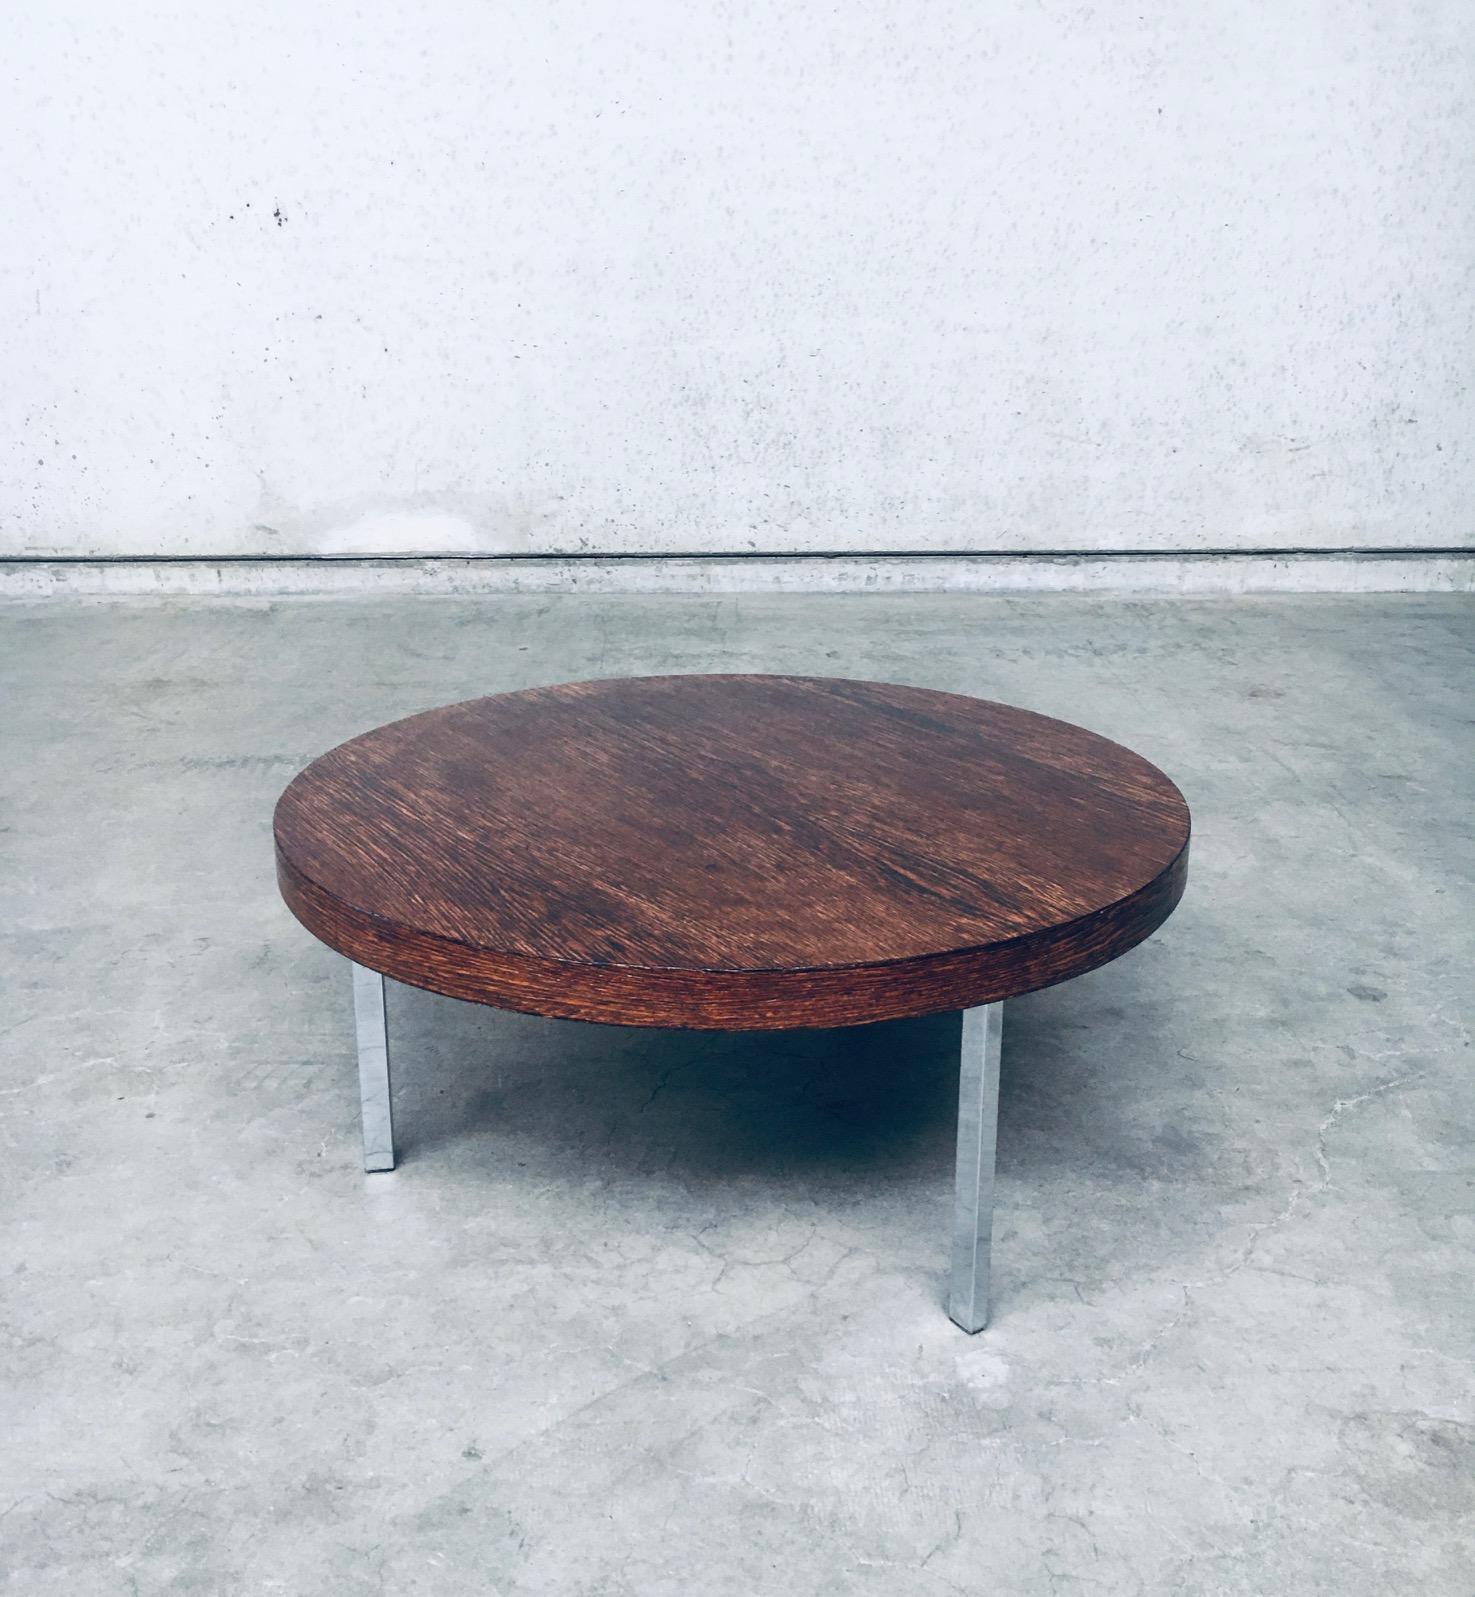 Midcentury Modern Dutch Design Tripod Coffee Table, Netherlands 1960's For Sale 11